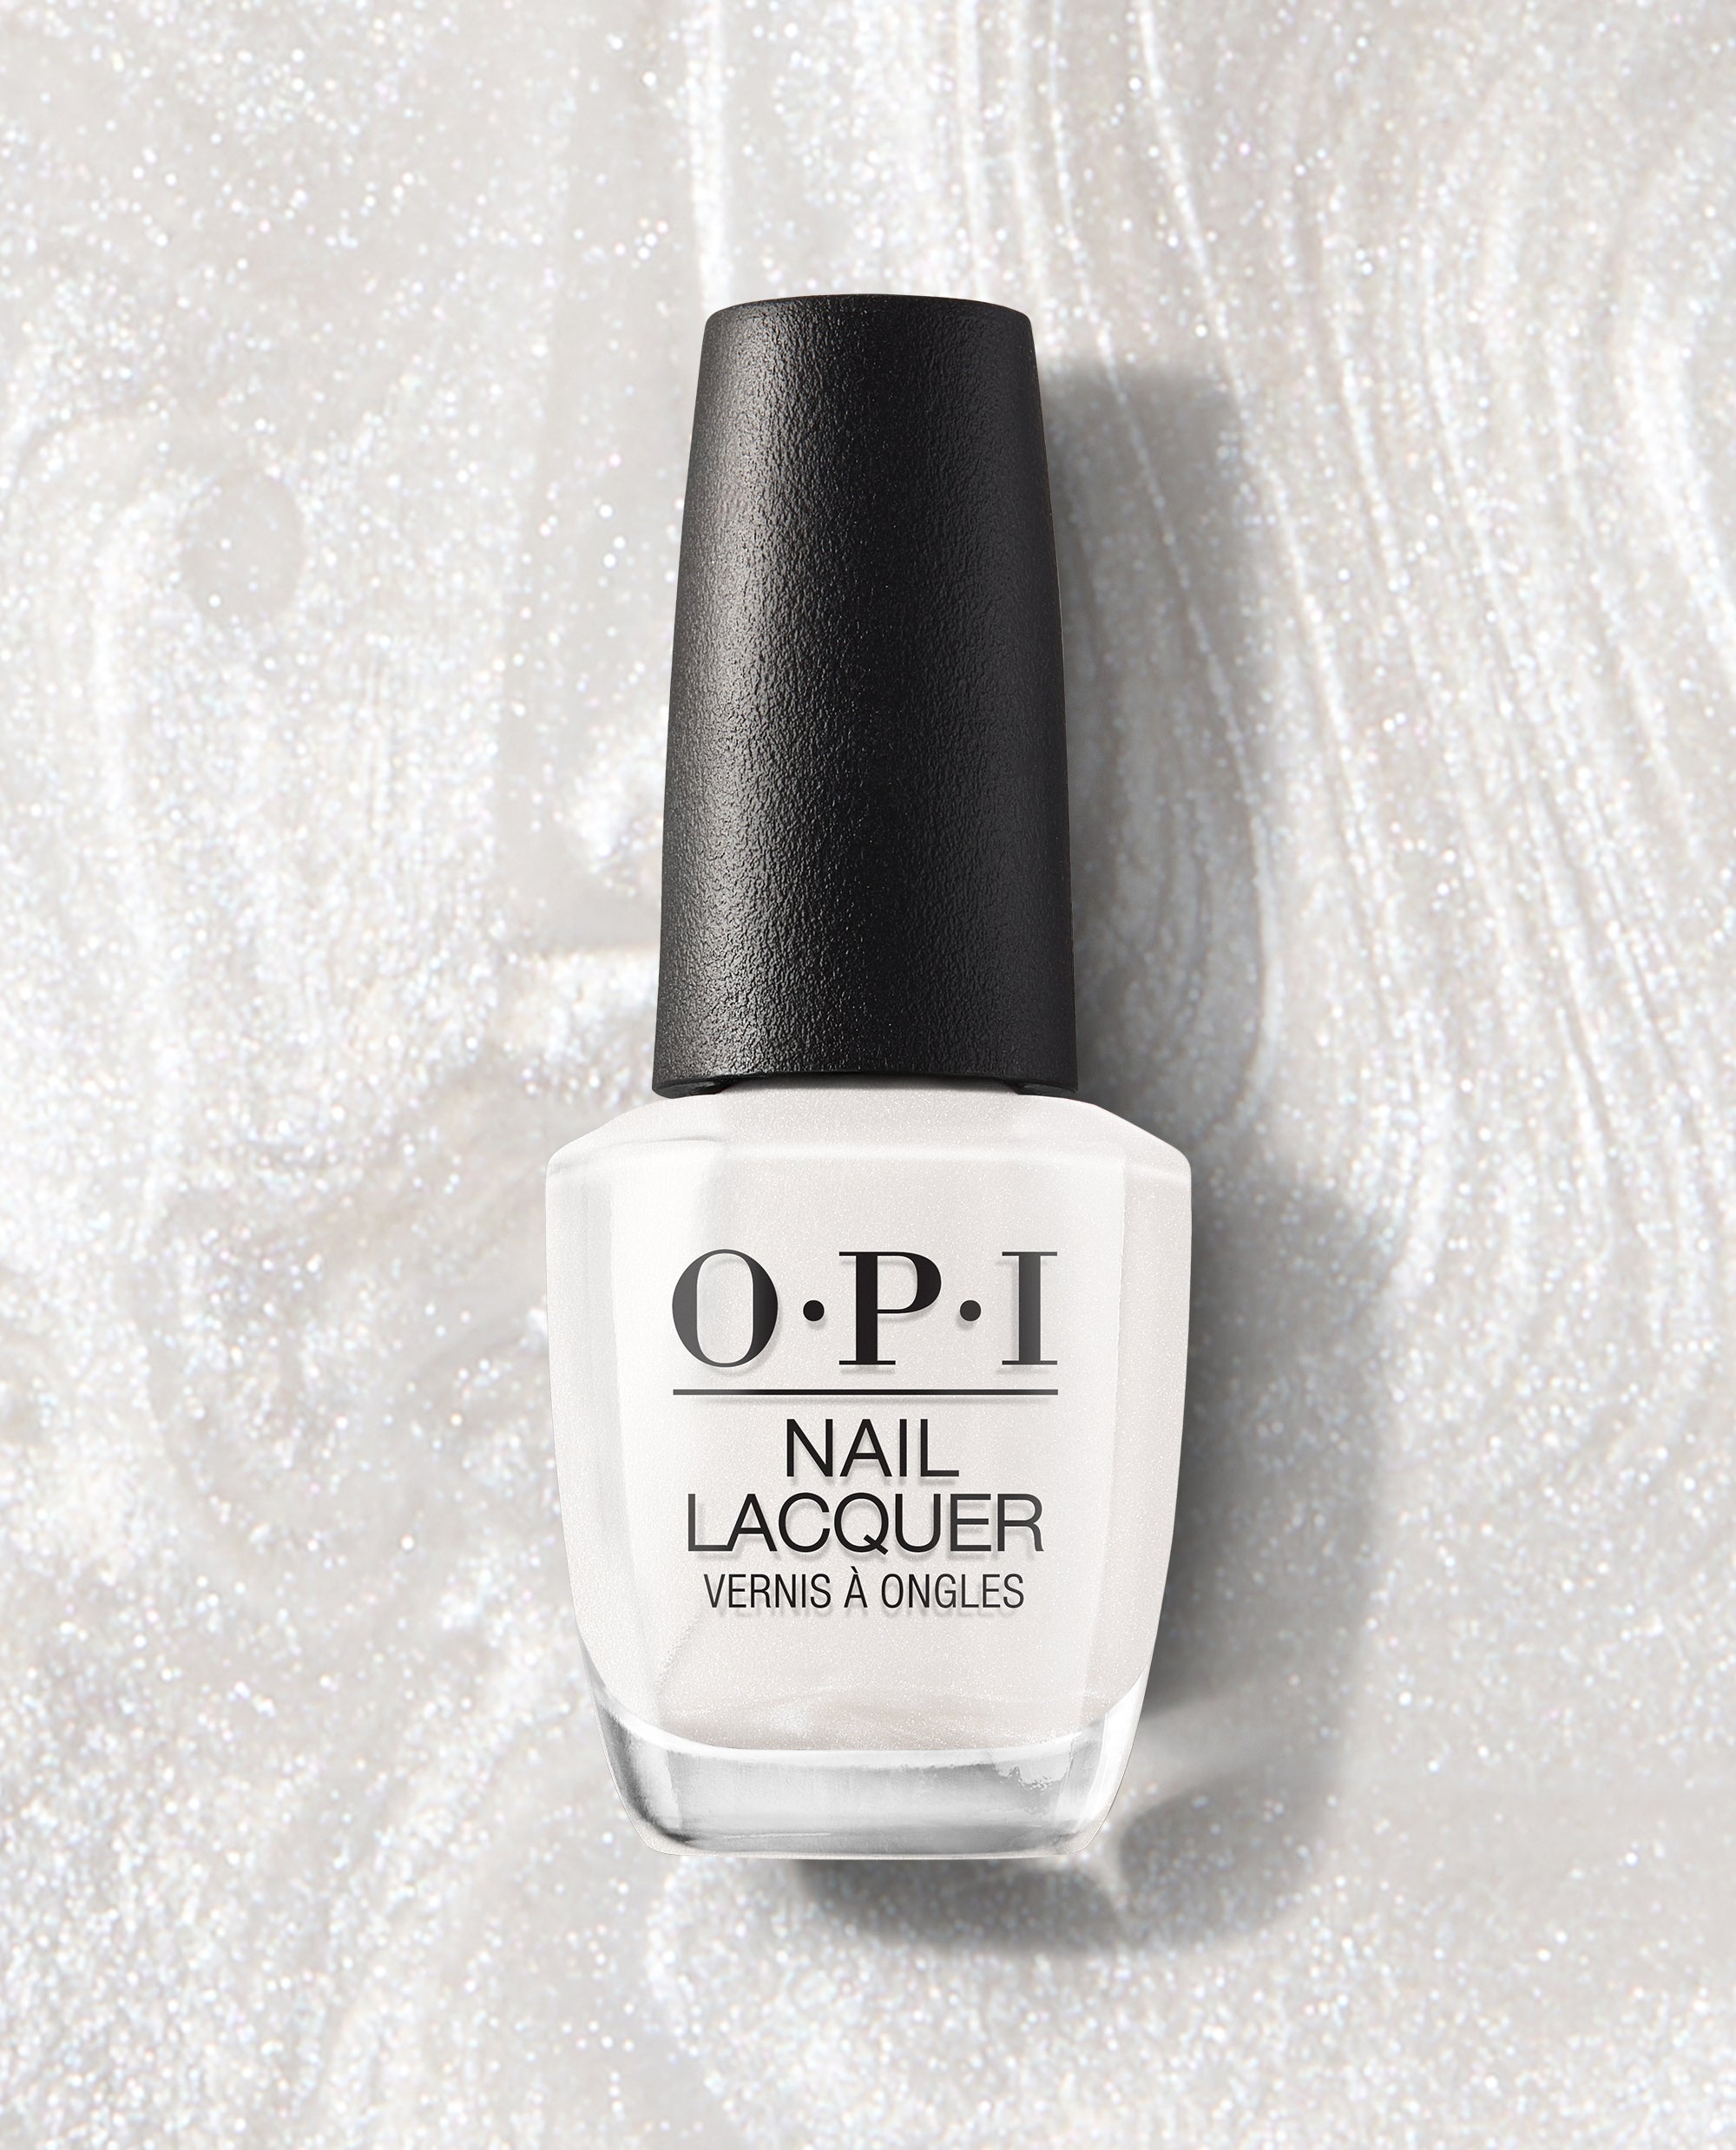 OPI on Instagram: “It's not an illusion – this sparkling iridescent white  glitter nail polish is truly on… | Gel nail colors, Glitter gel nails, White  glitter nails